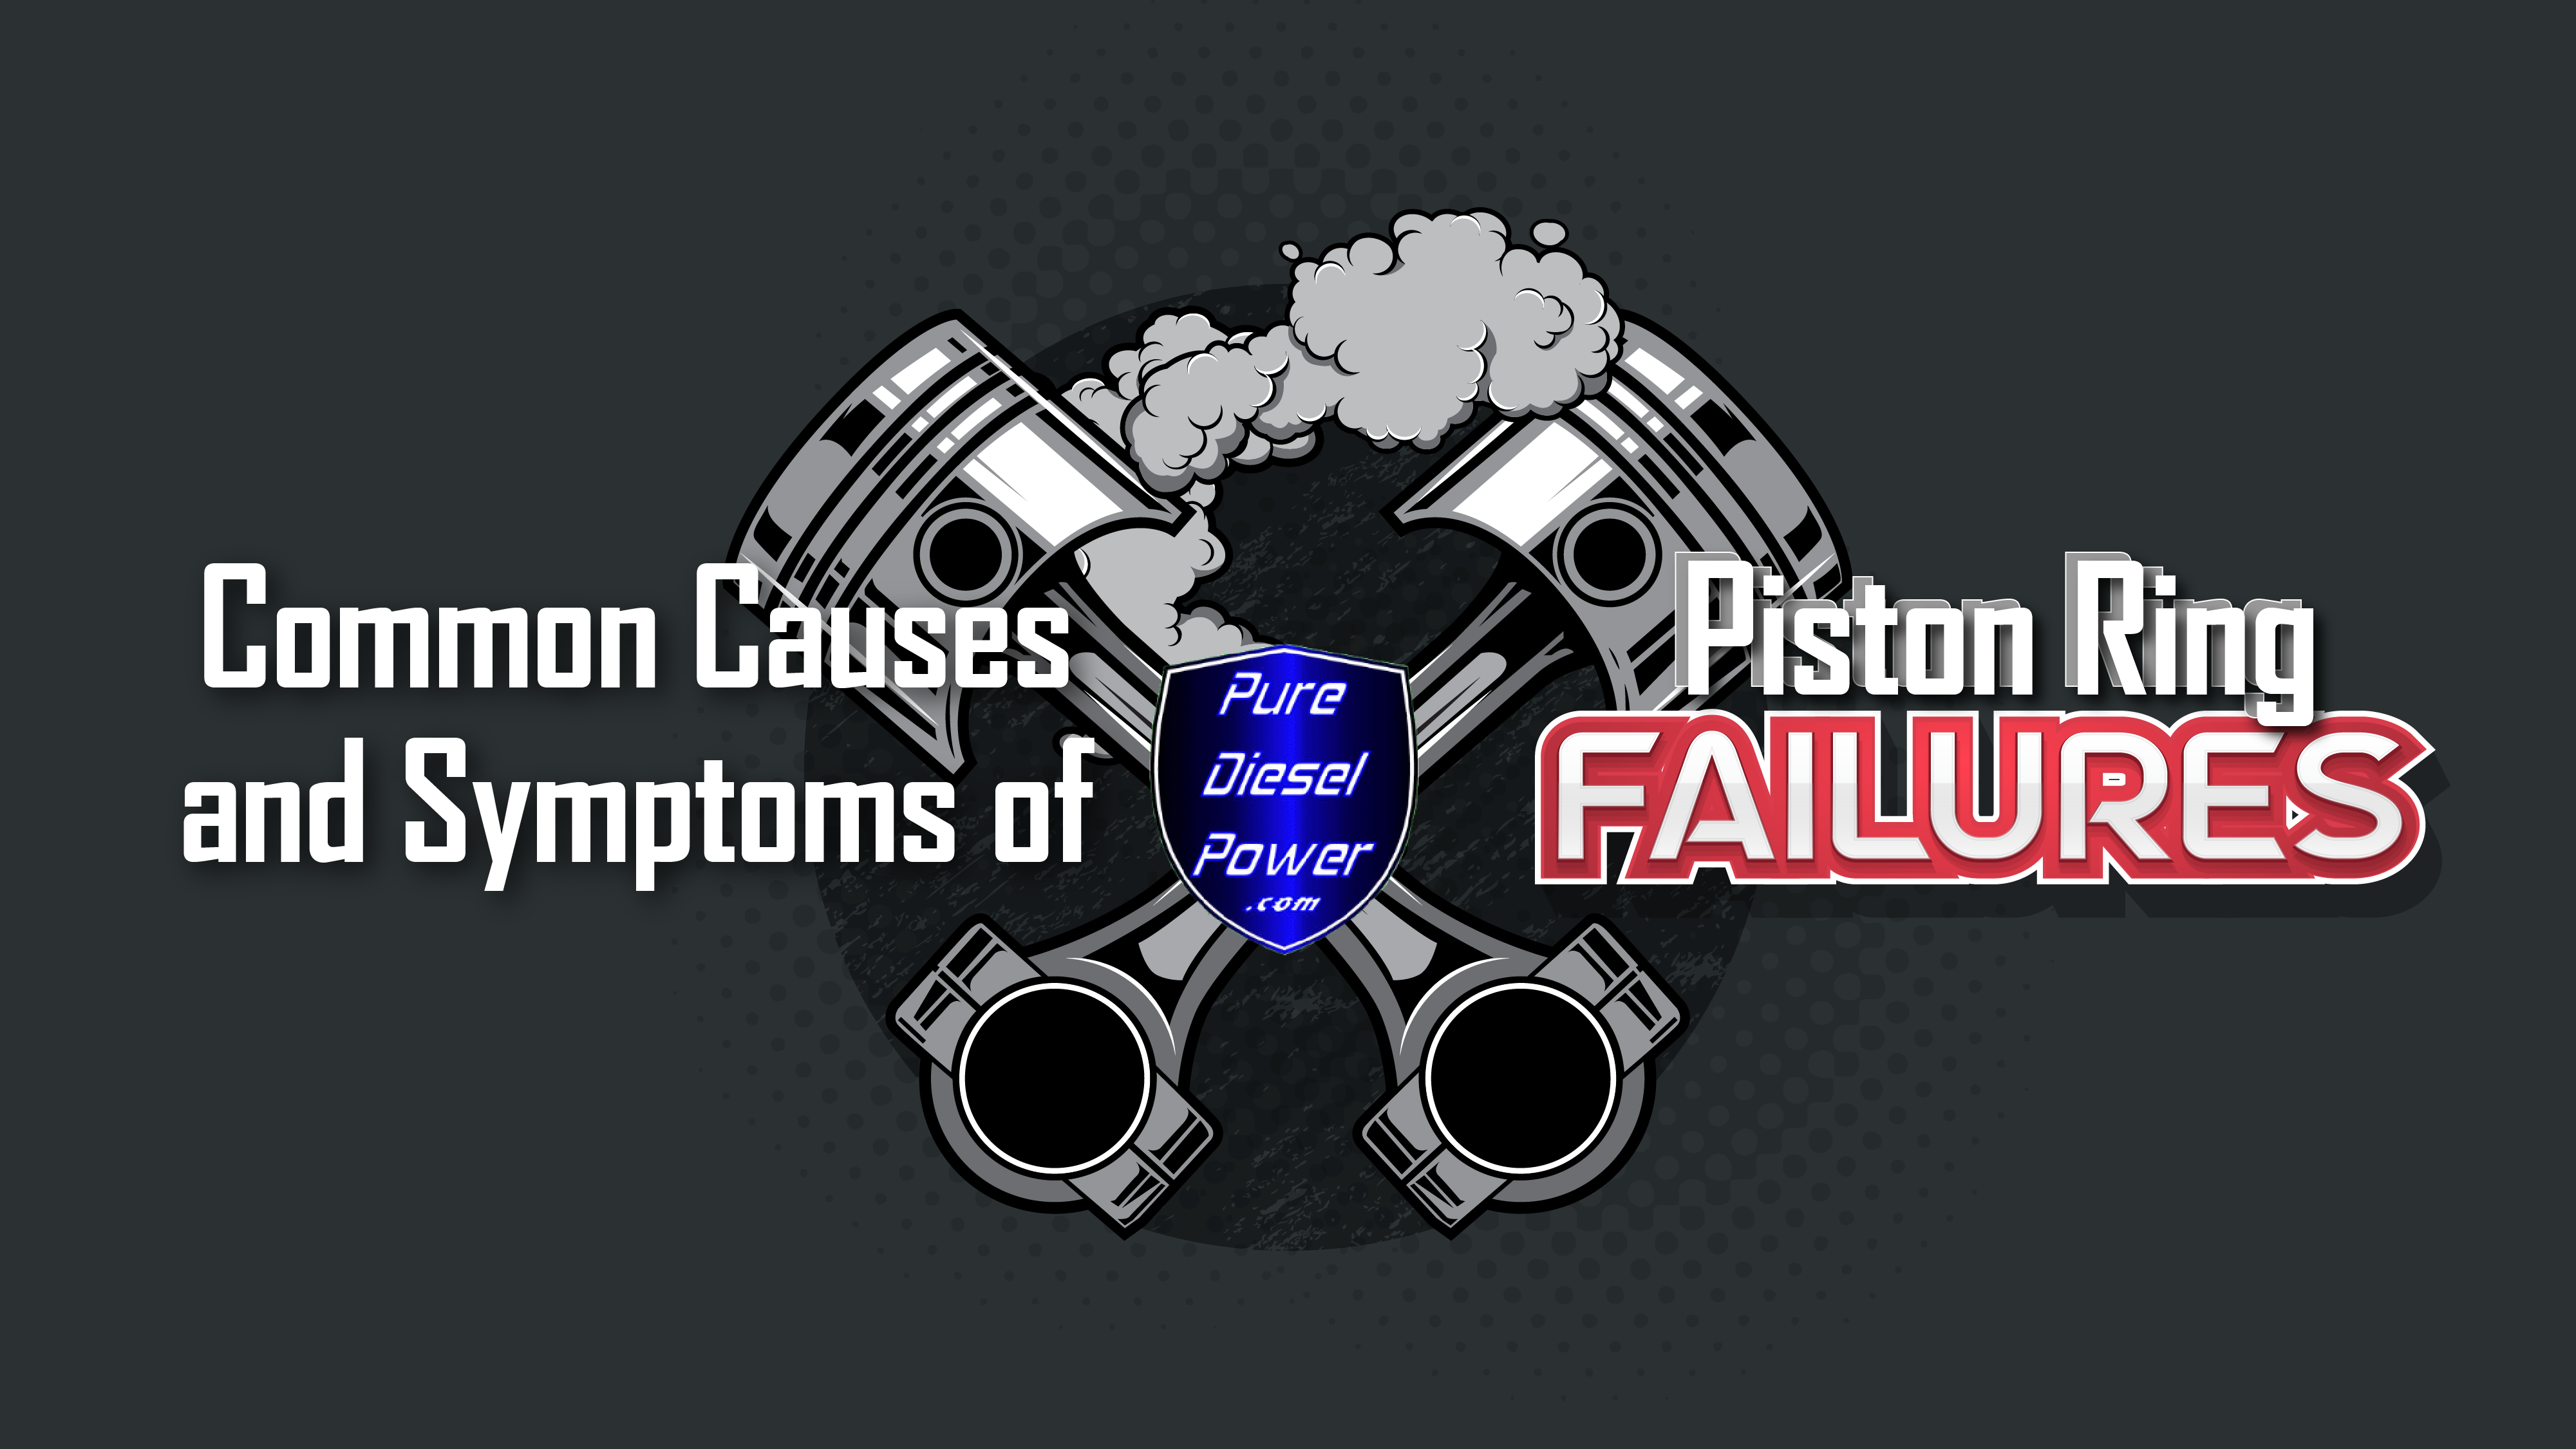 Common-Causes-and-Symptoms-of-Piston-Ring-Failures-diesel-power-performance-banner